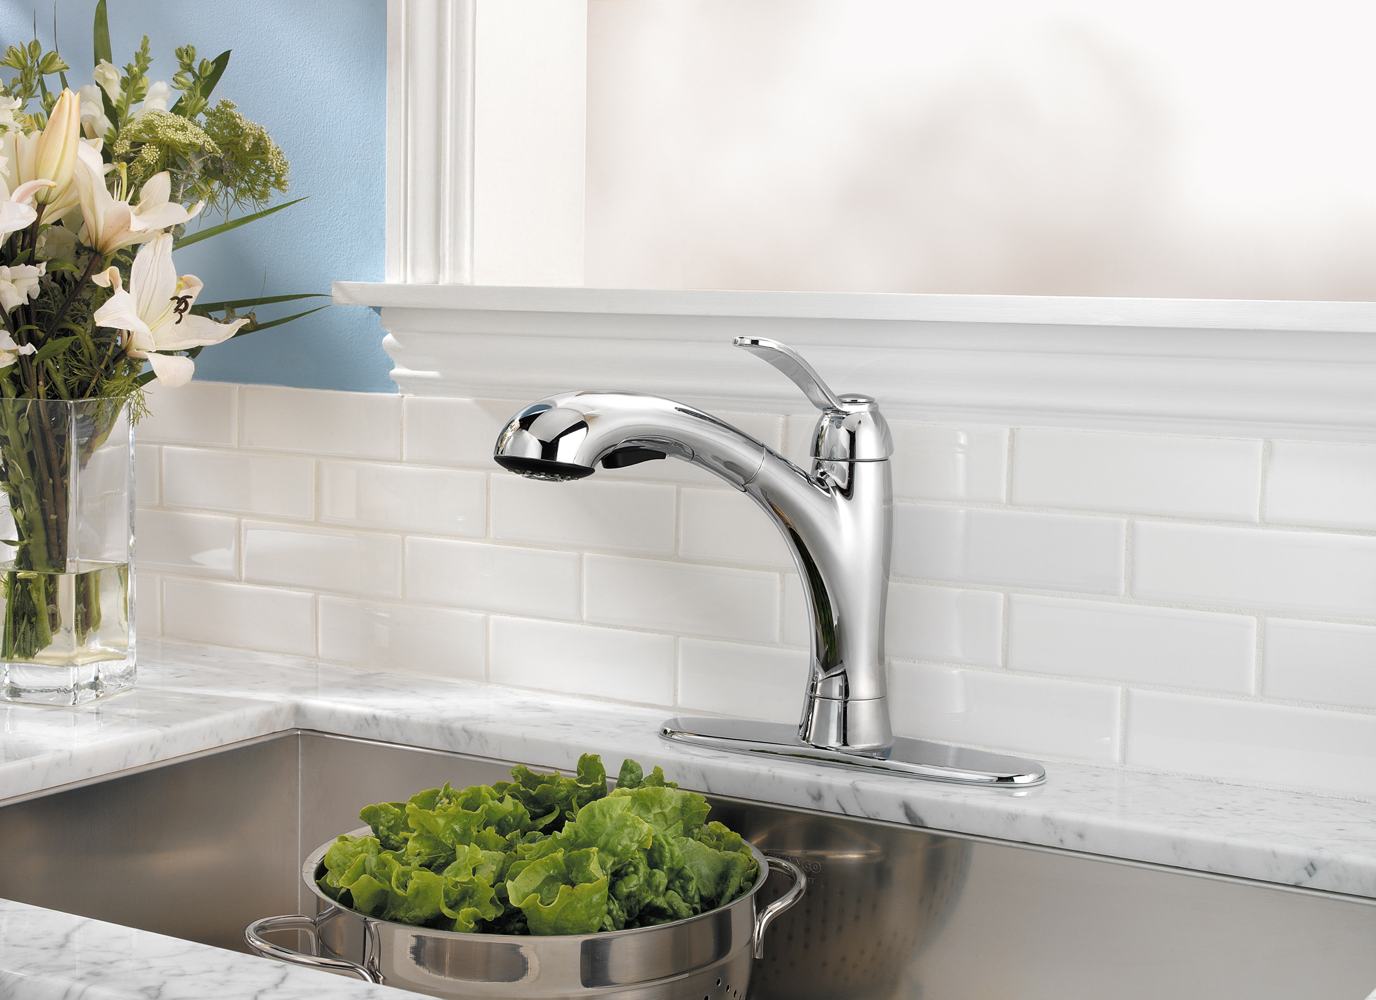 Use toothpaste to shine any chrome faucets in your home.